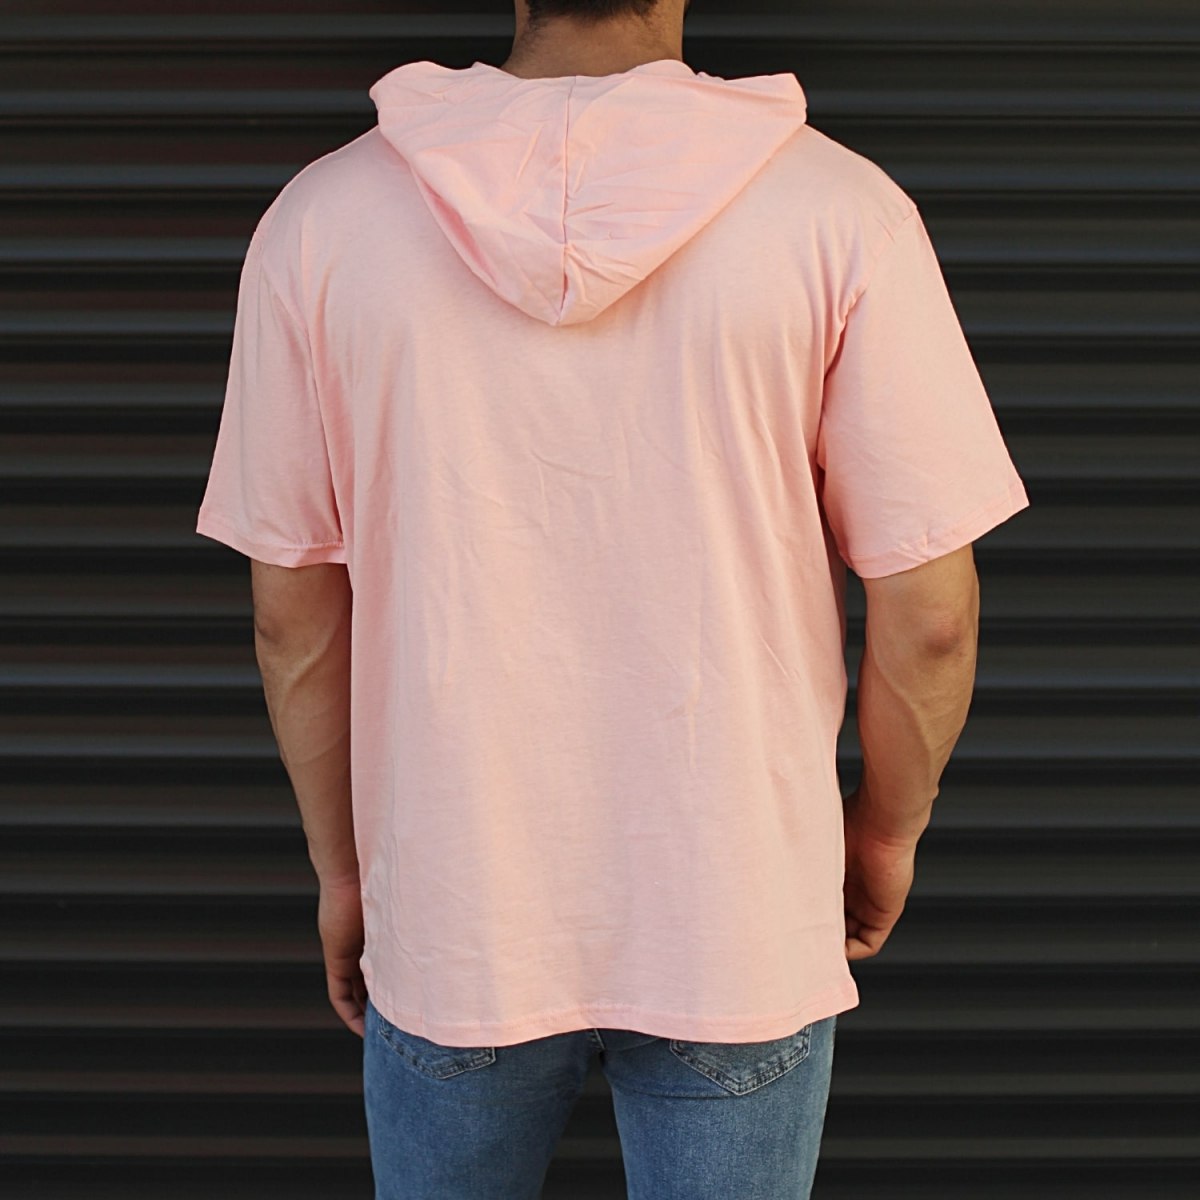 Men's Hooded Short Sleeve T-Shirt With Pockets Pink - 3